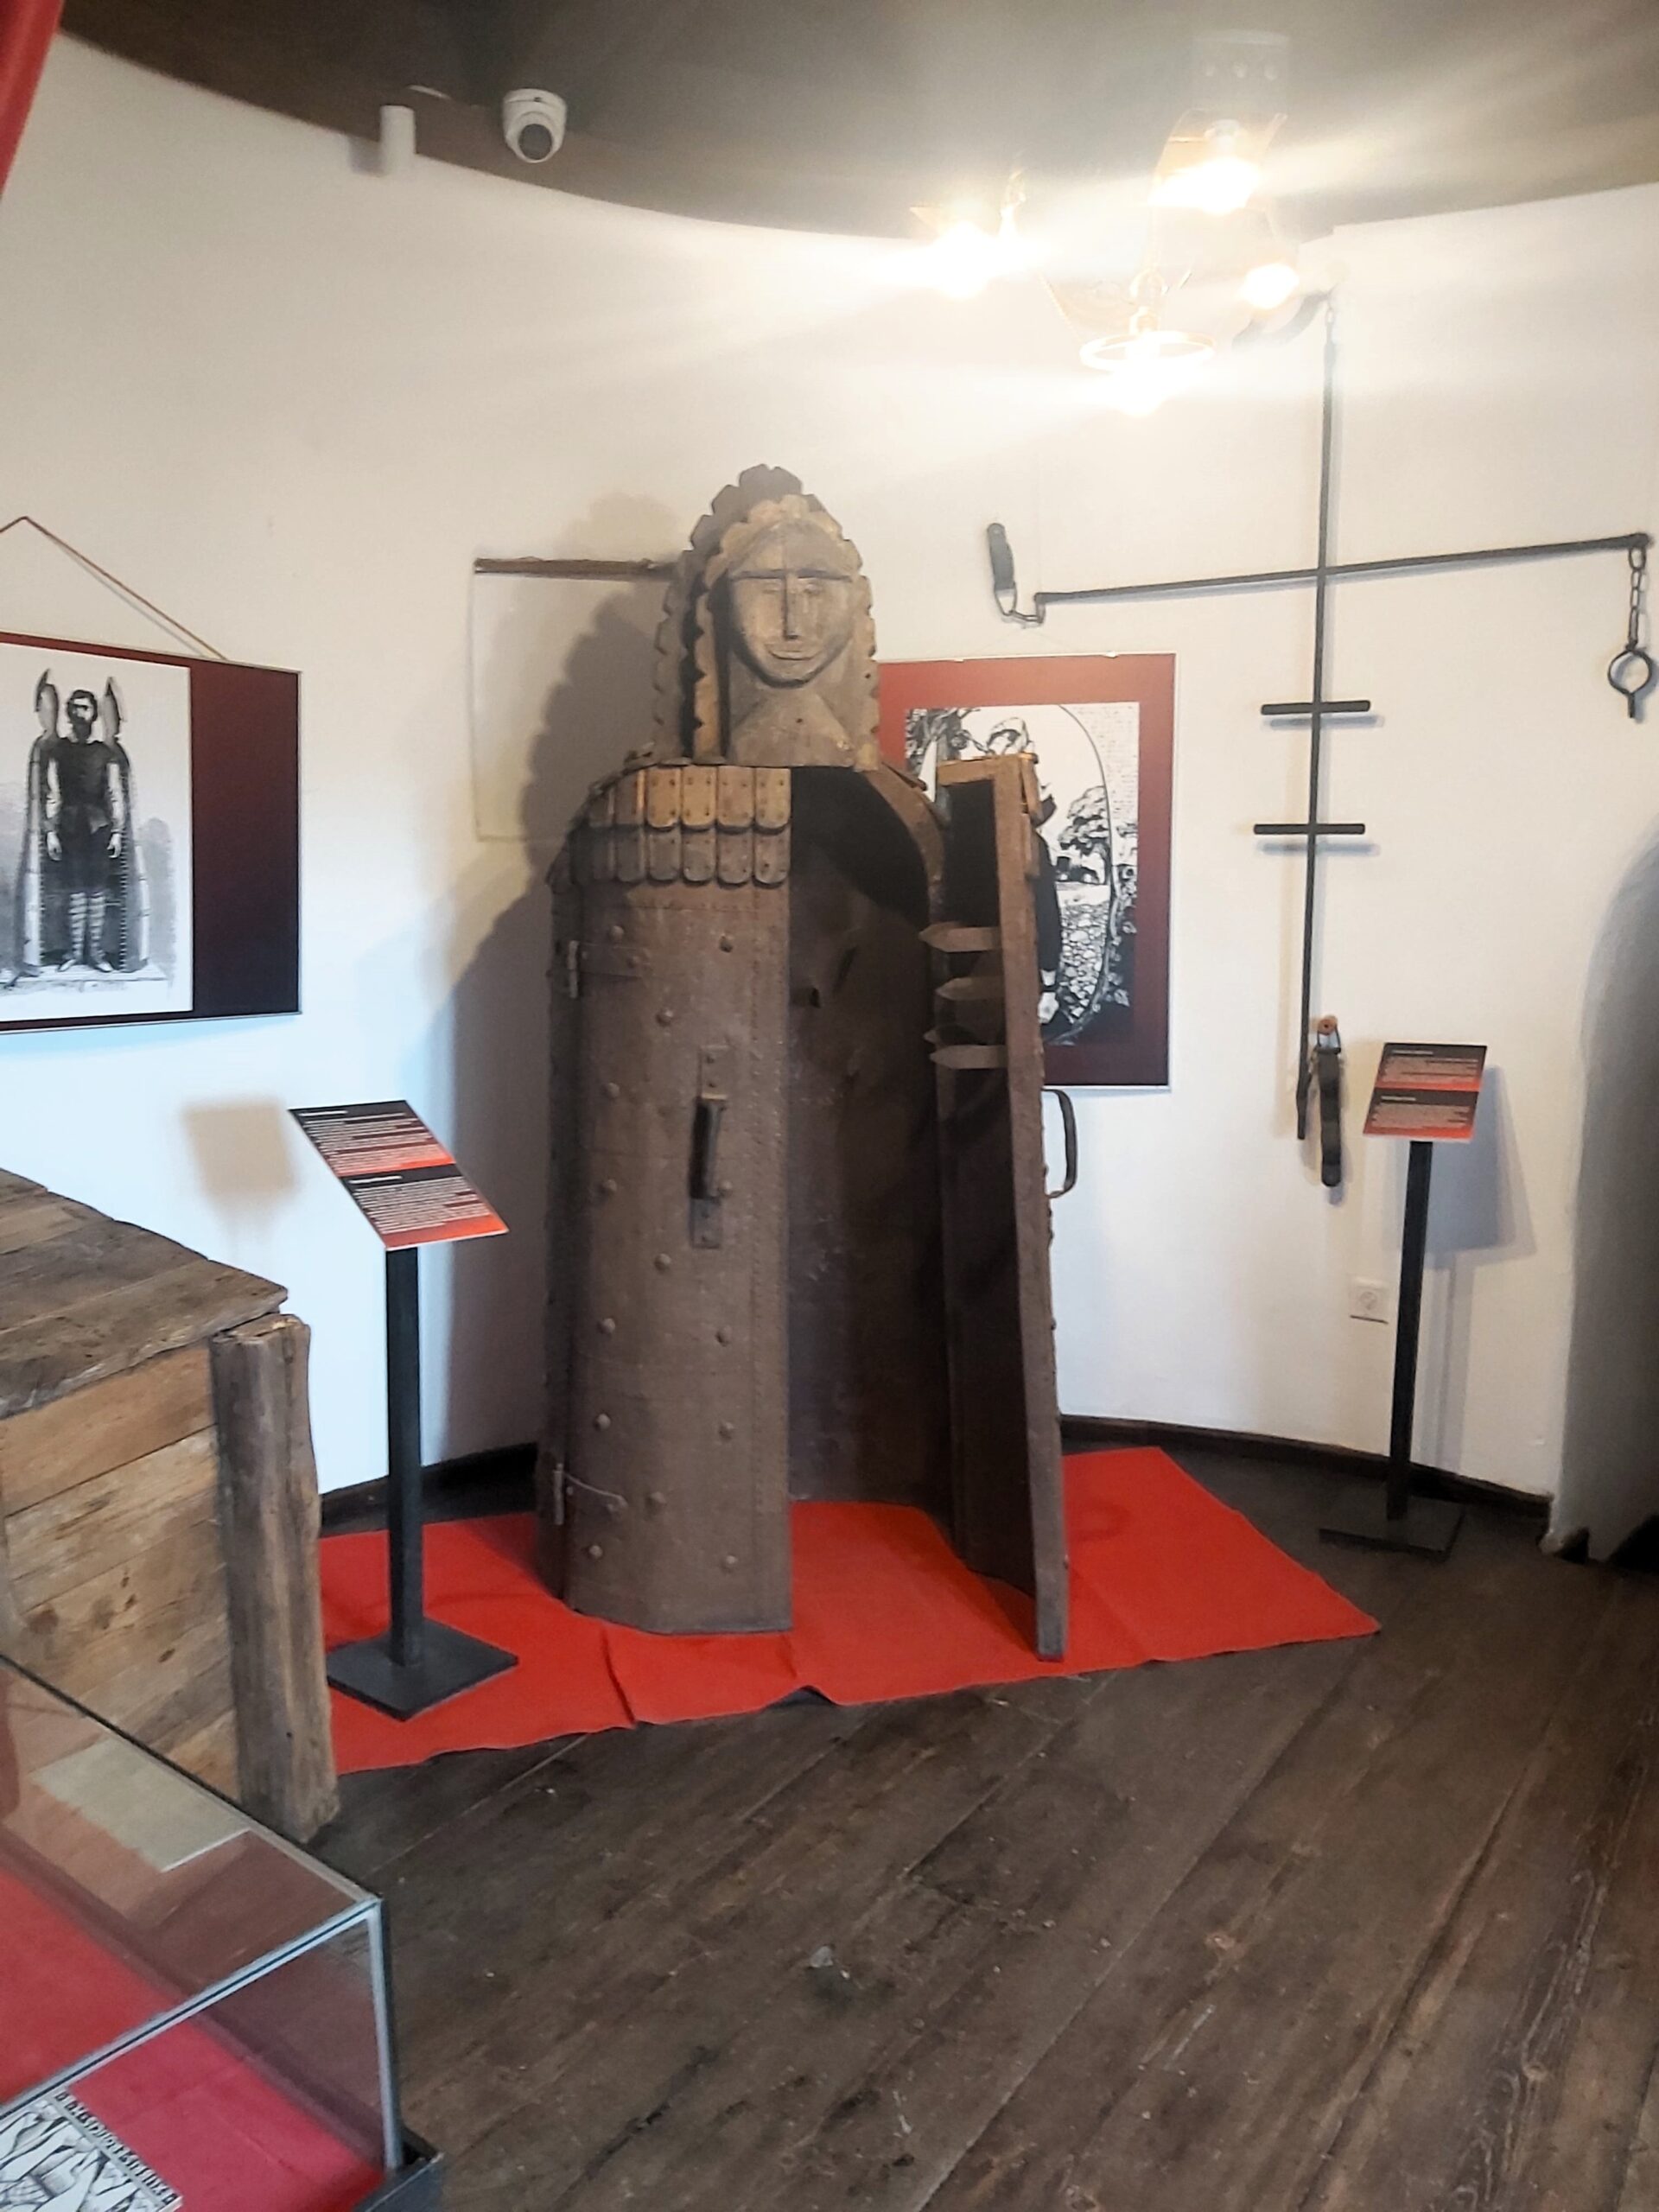 An iron maiden style torture chamber in Bran Castle, Romania